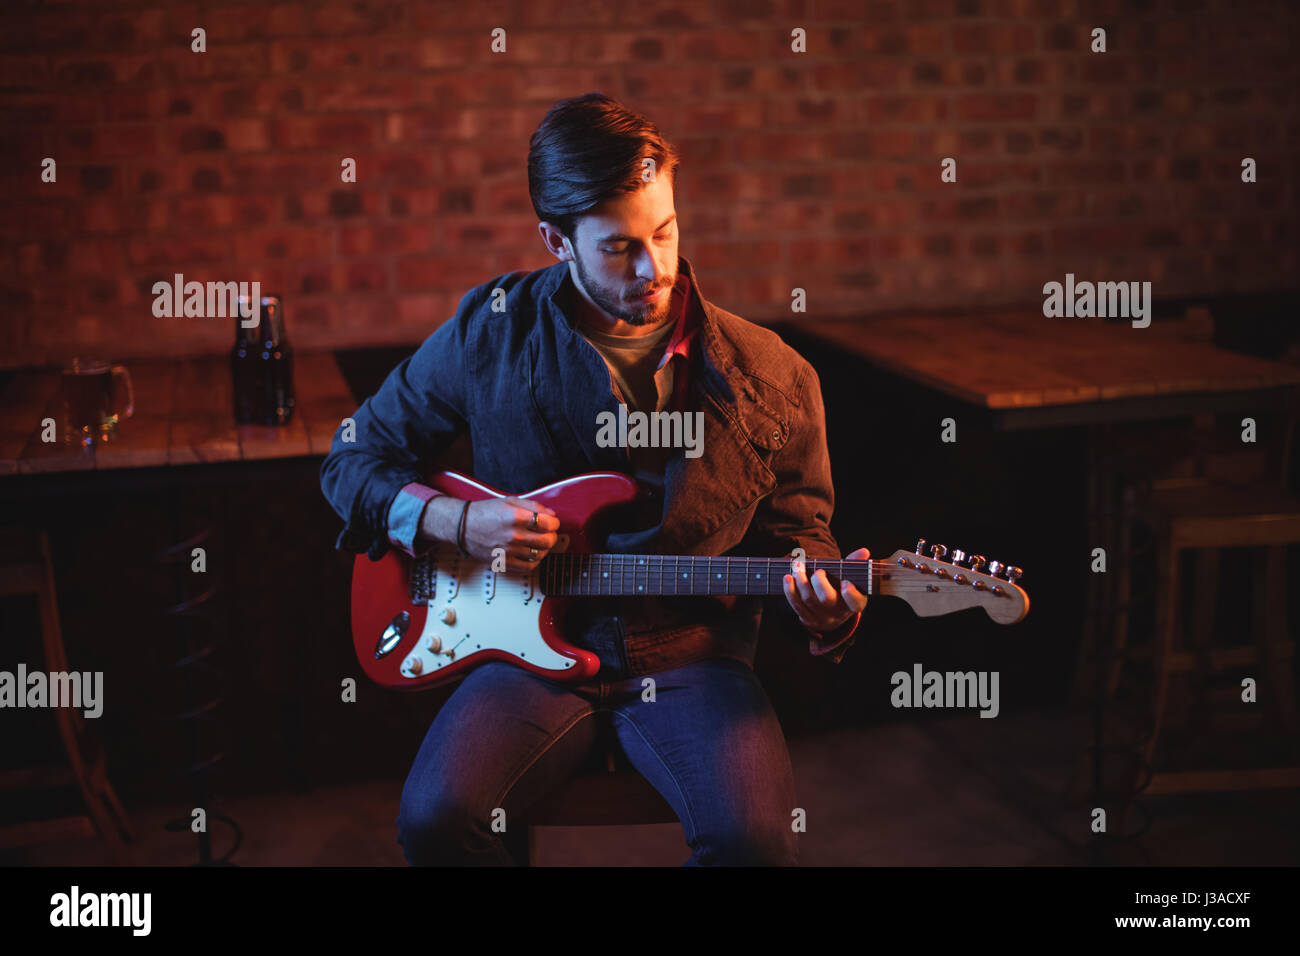 Young man playing guitar in pub Stock Photo